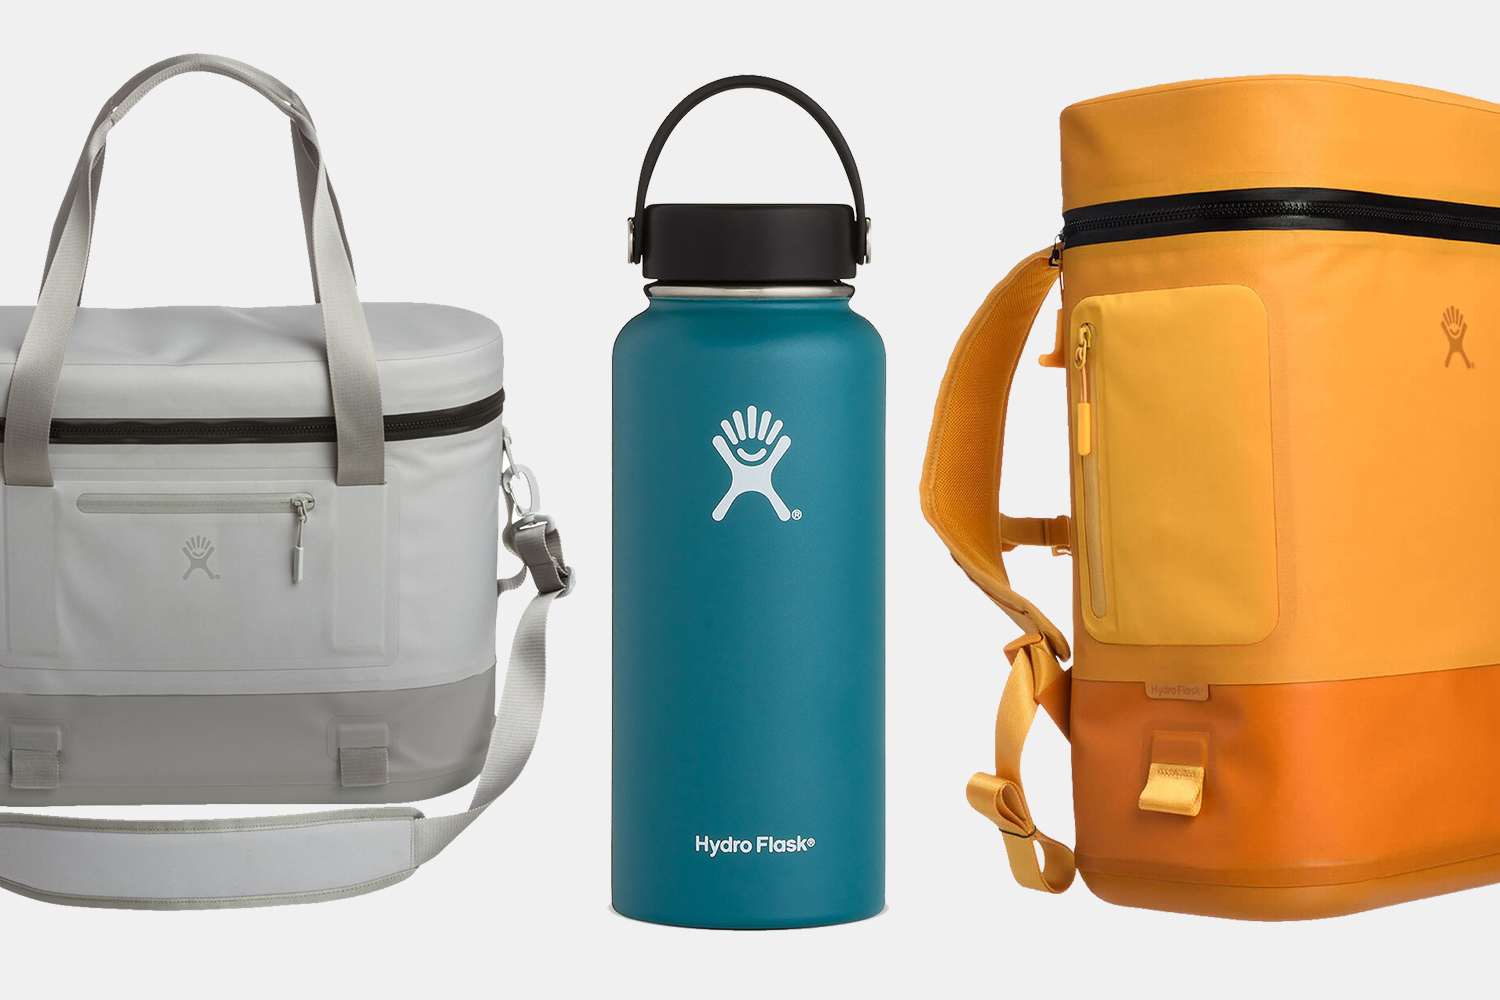 Best deals on Yeti and Hydro Flask: 25% off sales on select